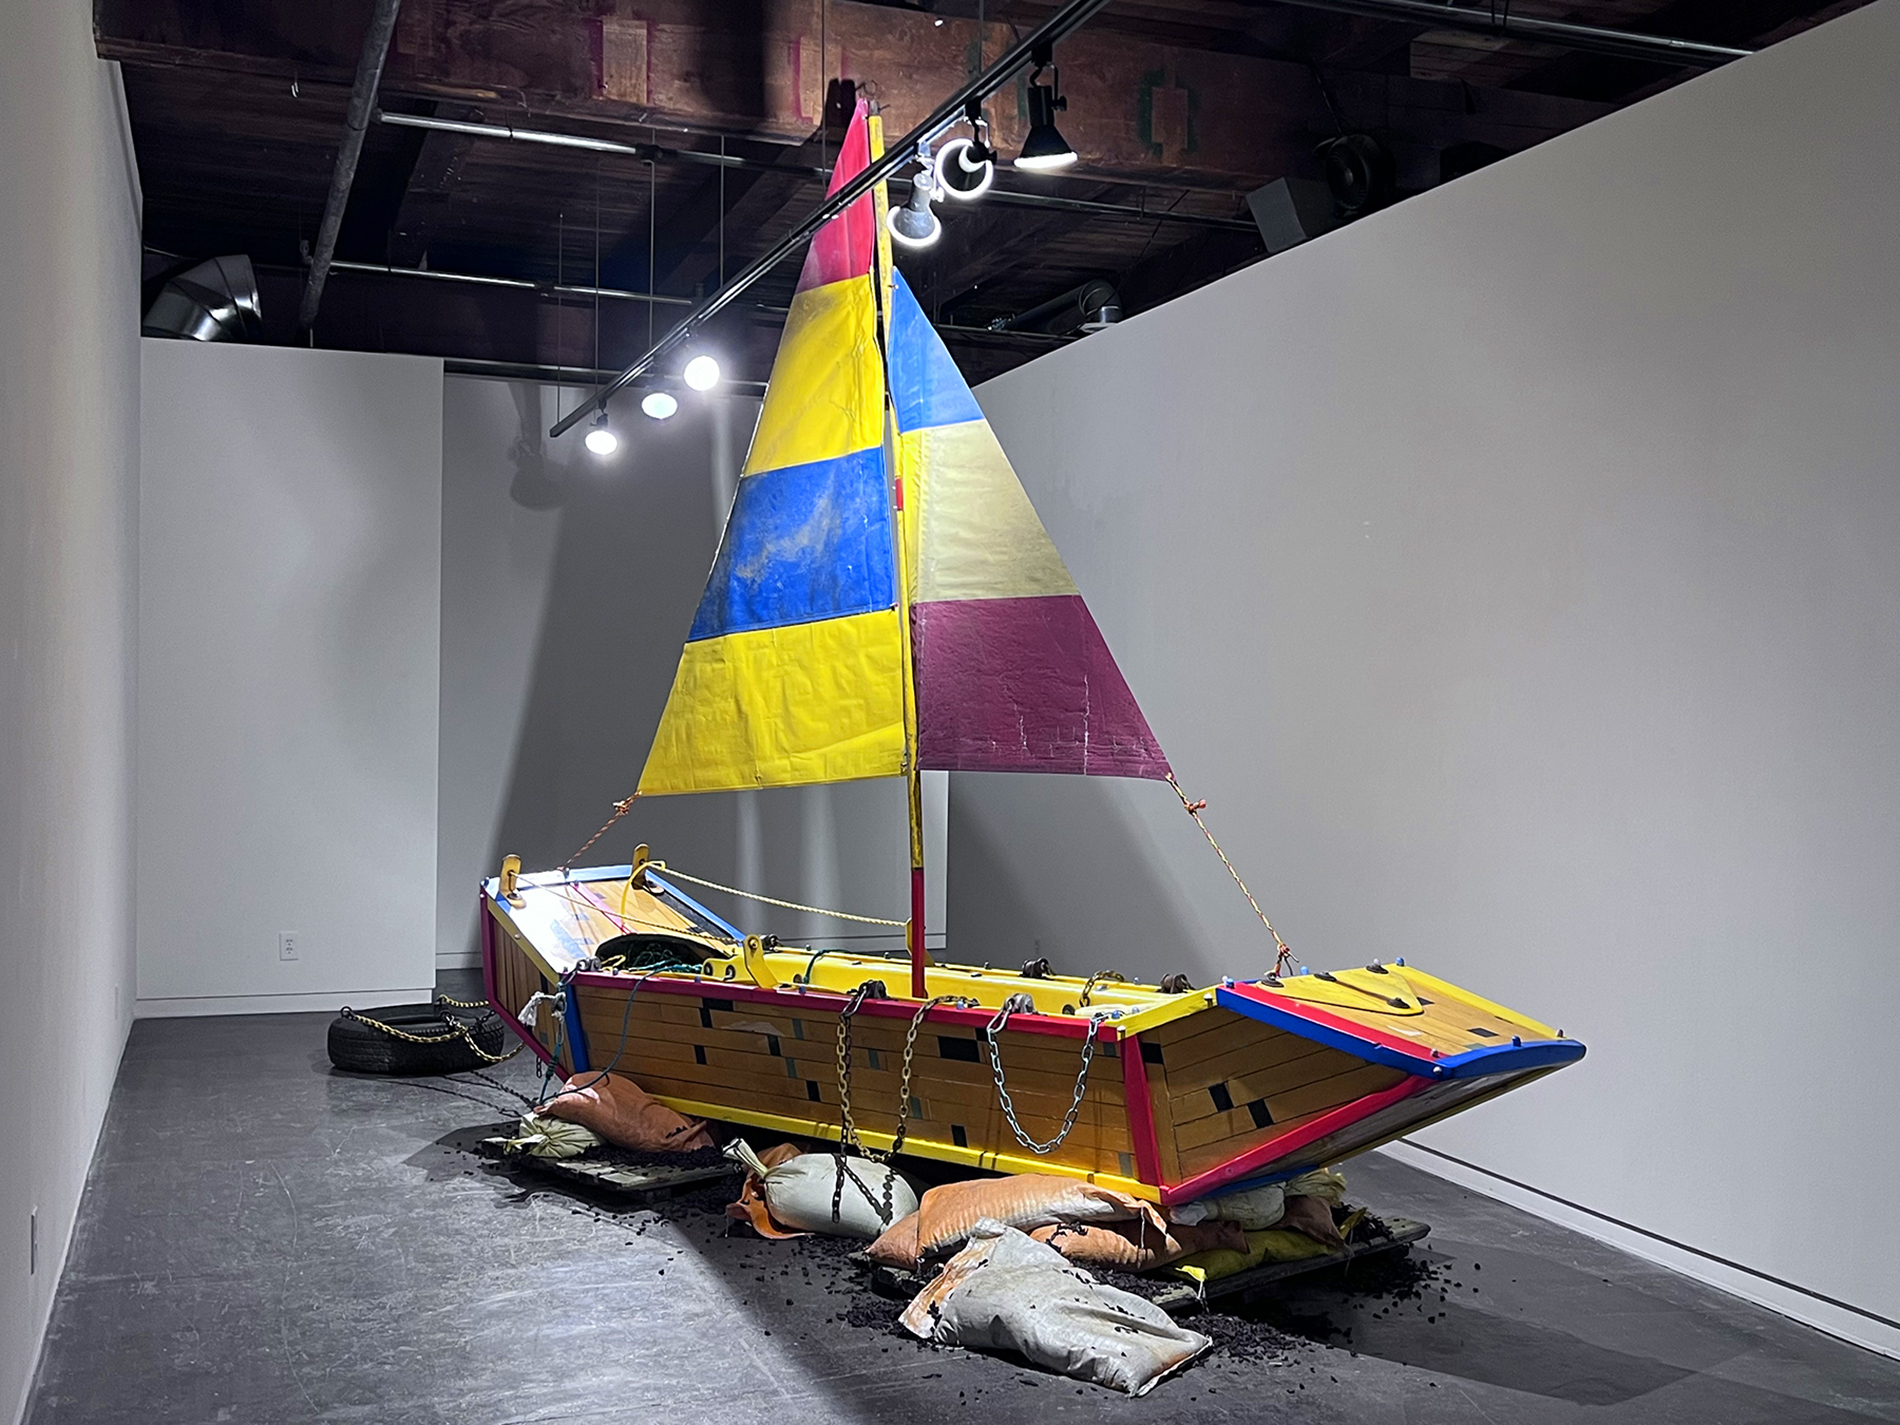 Aaron Coleman's Delicate and Filled with Dynamite, a handmade boat constructed from salvaged basketball court flooring is stranded on a sandbags filled with rubber mulch from turf football fields.